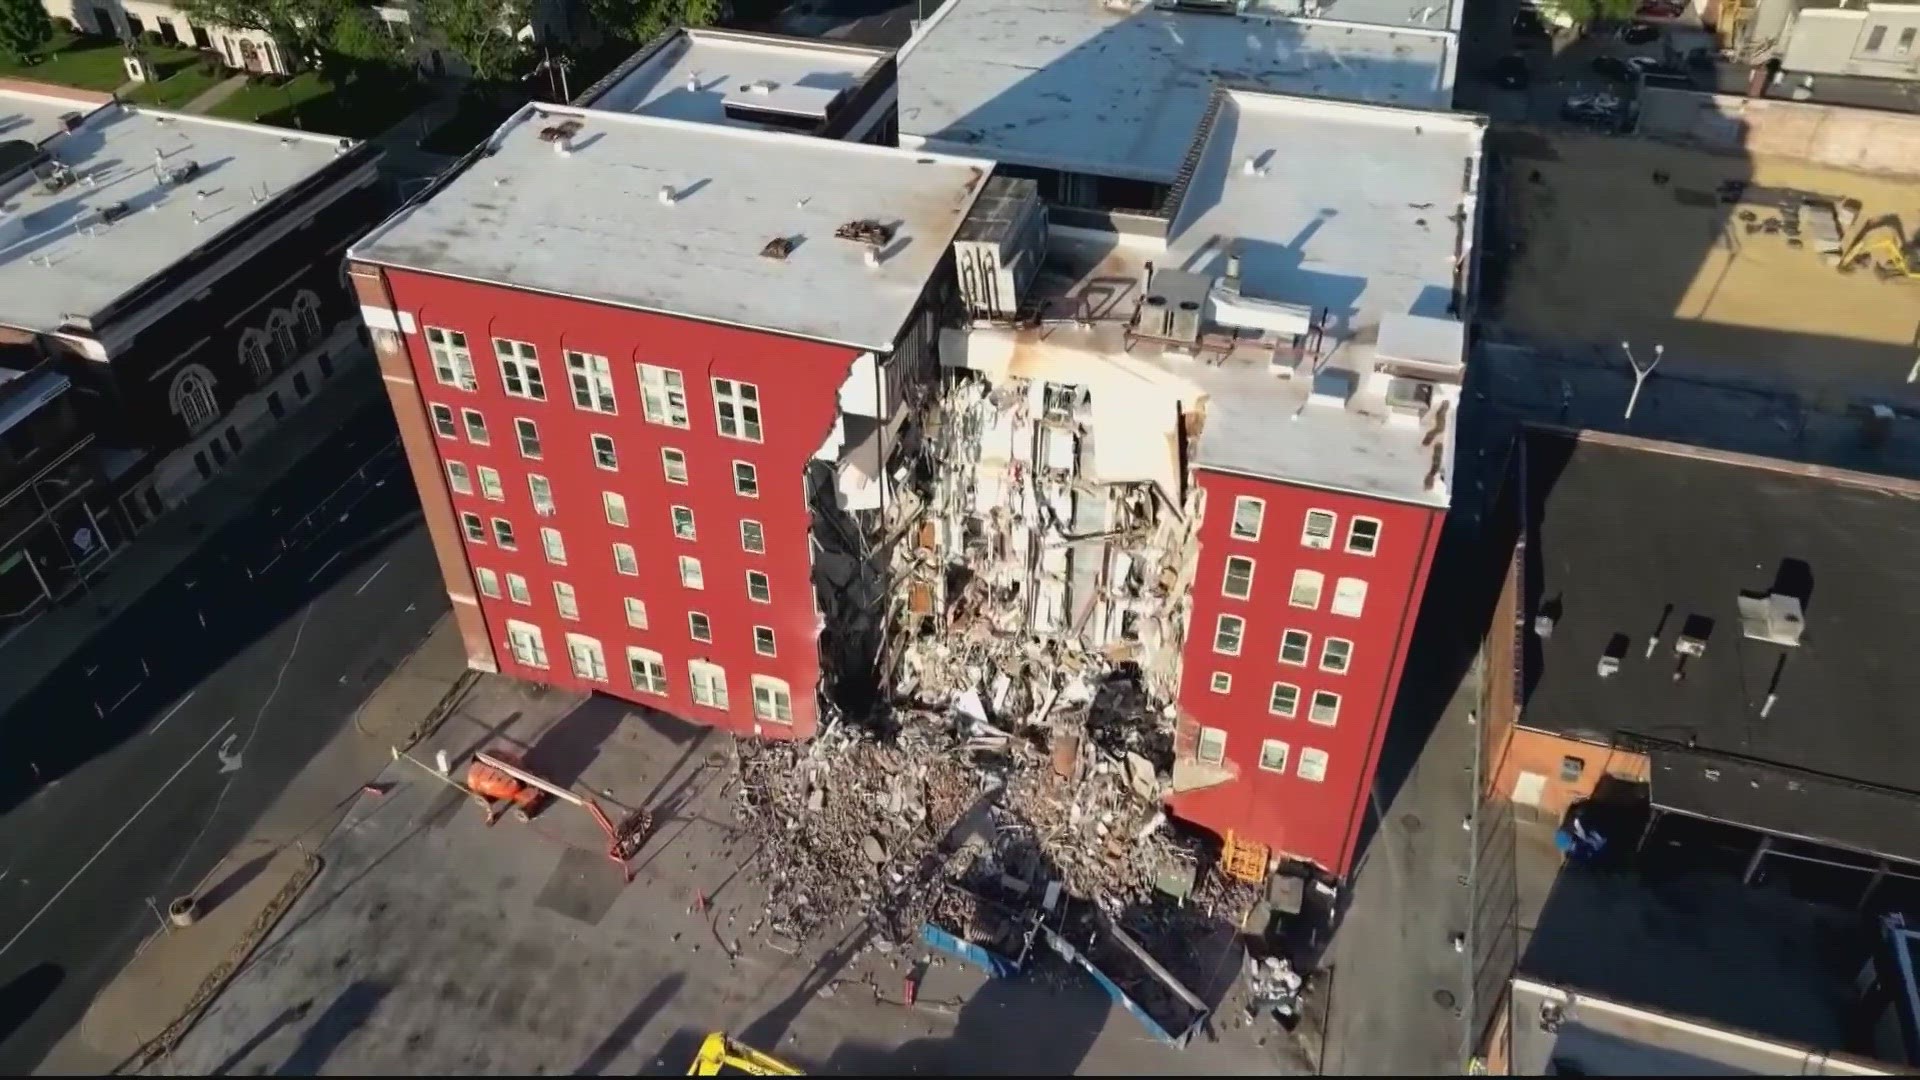 Five people were unaccounted for after an Iowa apartment building partially collapsed, officials said. Two of them are thought to be inside the building.